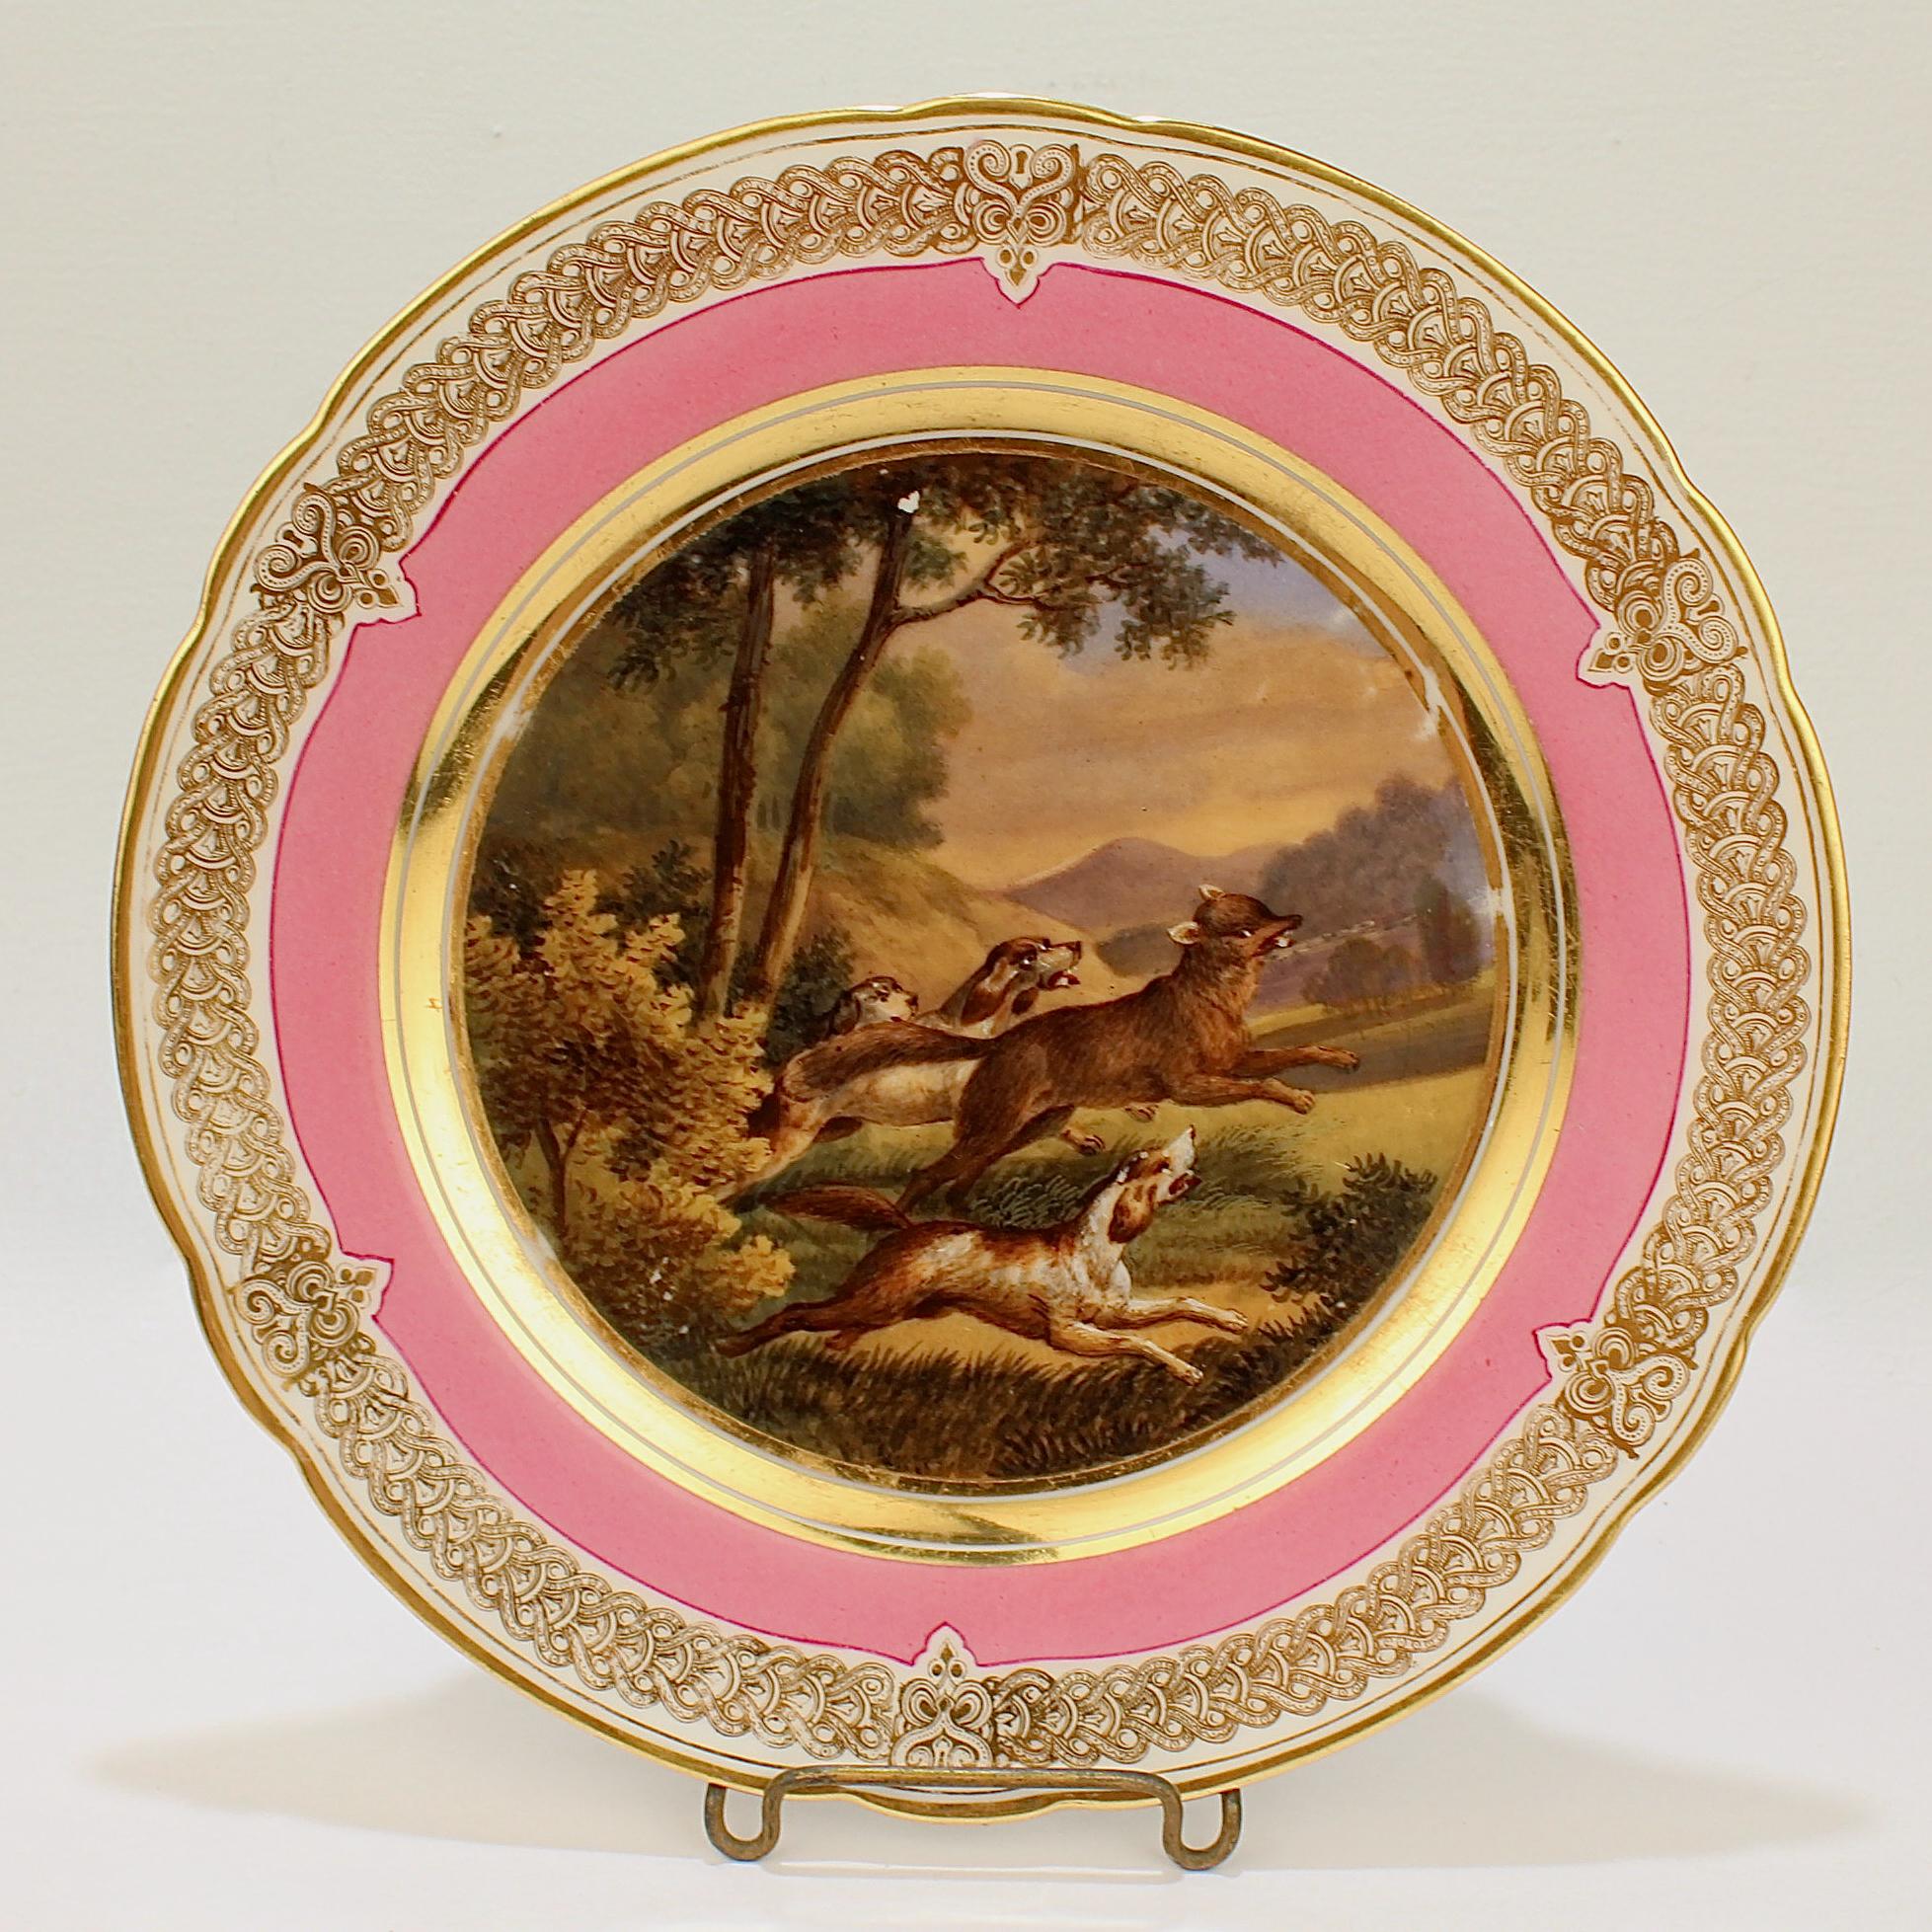 A wonderful antique 19th century Paris porcelain plate.

With a hand painted scene of a fox hunt in a bucolic landscape including a fleeing fox and 3 hounds in chase. 

It has a rich pink border and an elaborate gilt design to the rim and a